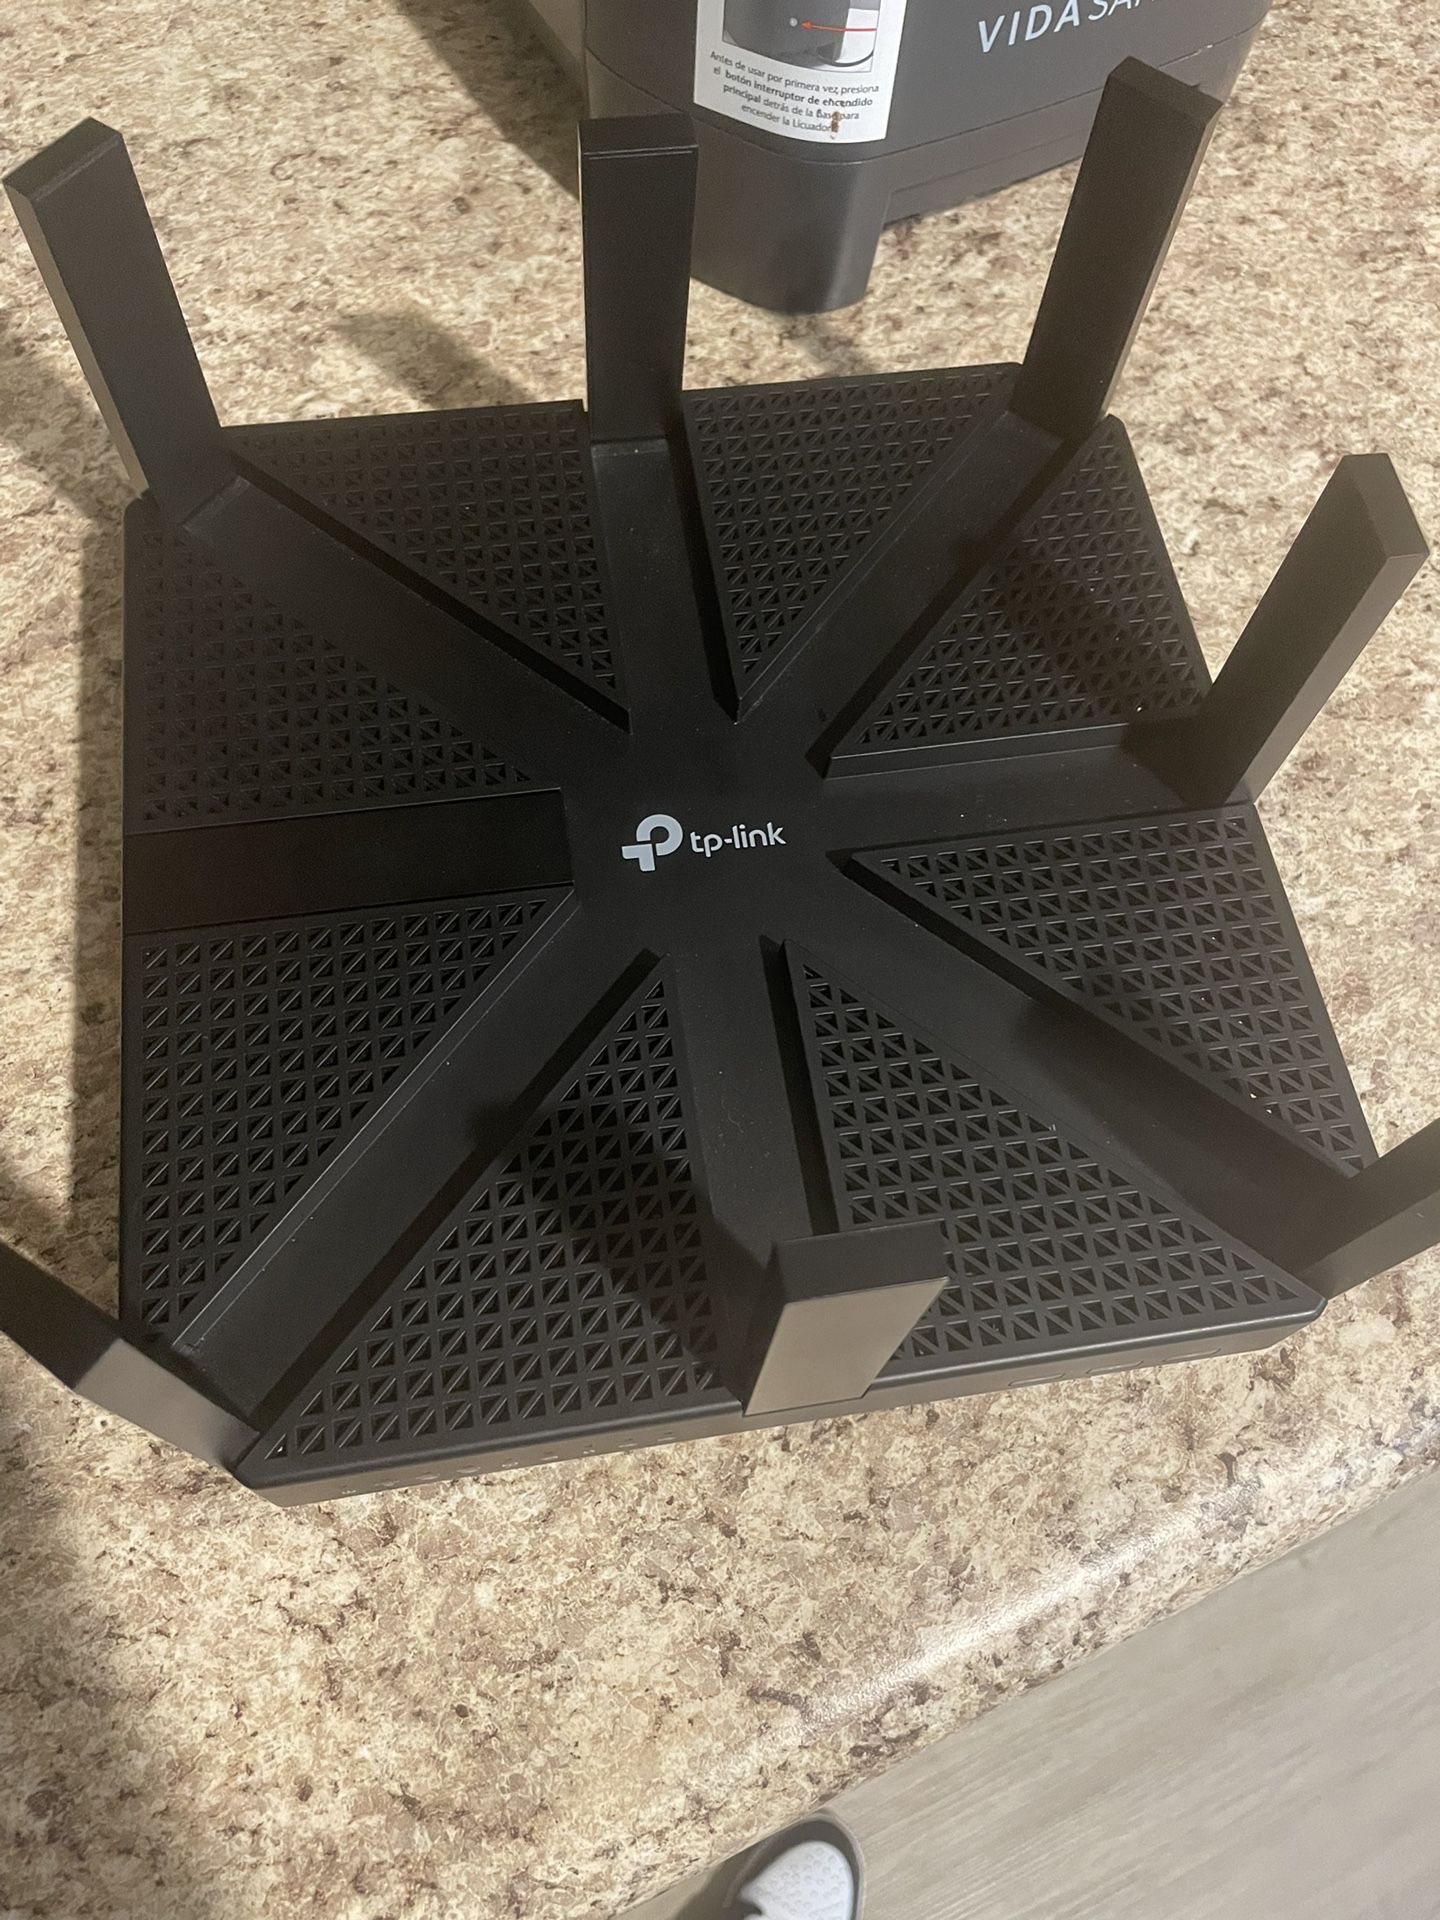 Ptp-link4000x Gaming Router